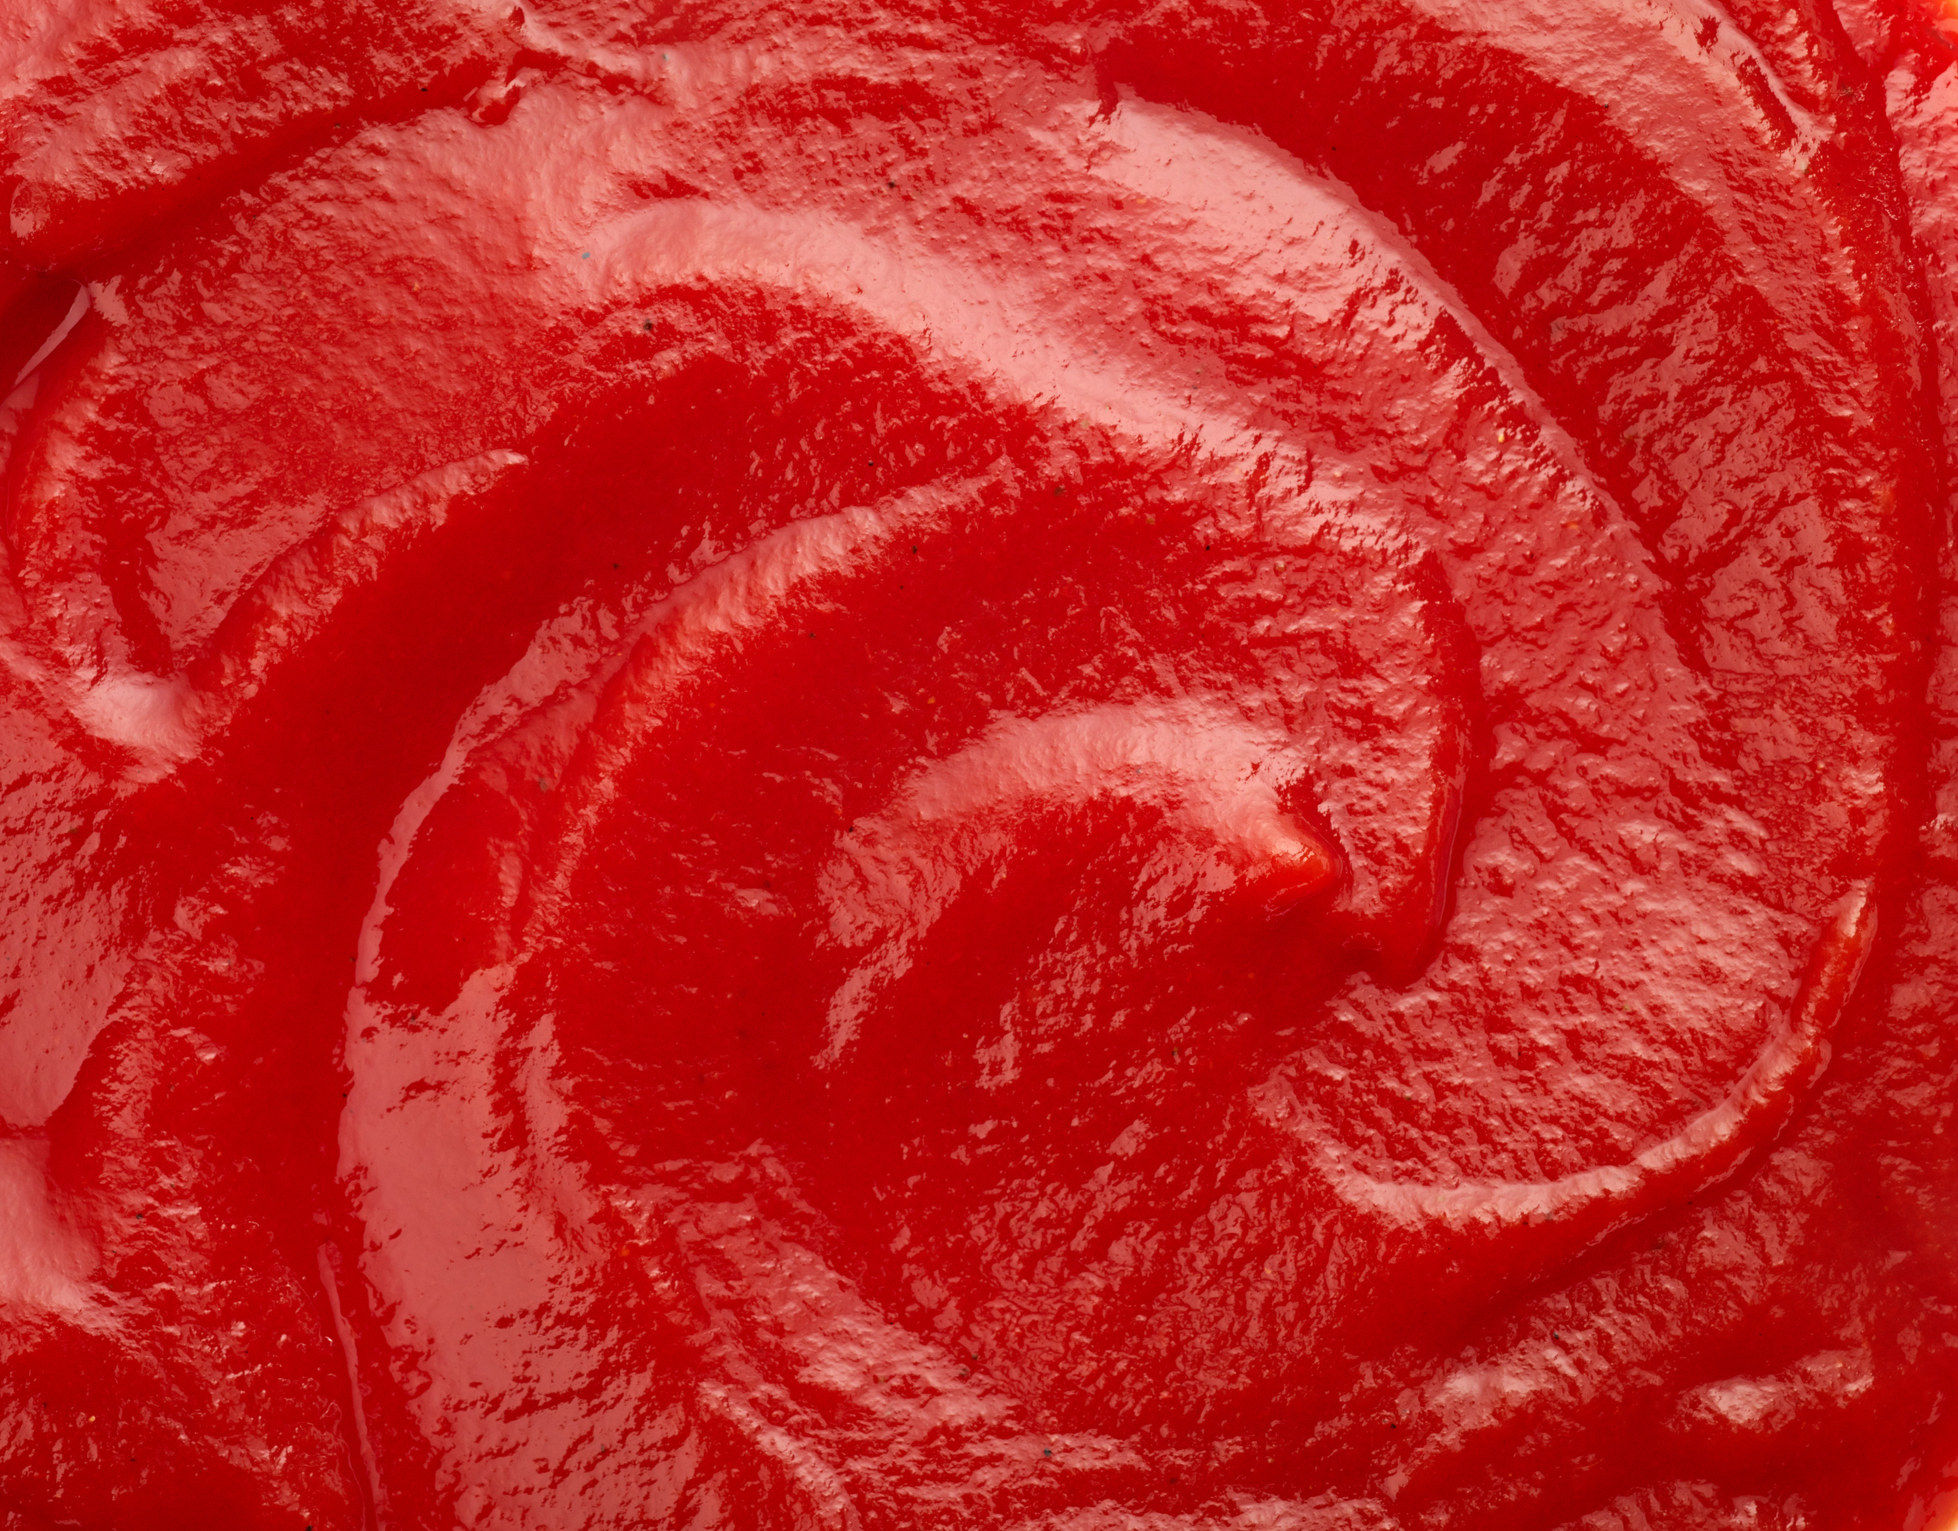 Close-up of a textured, red, swirling sauce, resembling the consistency of ketchup. No people or text present